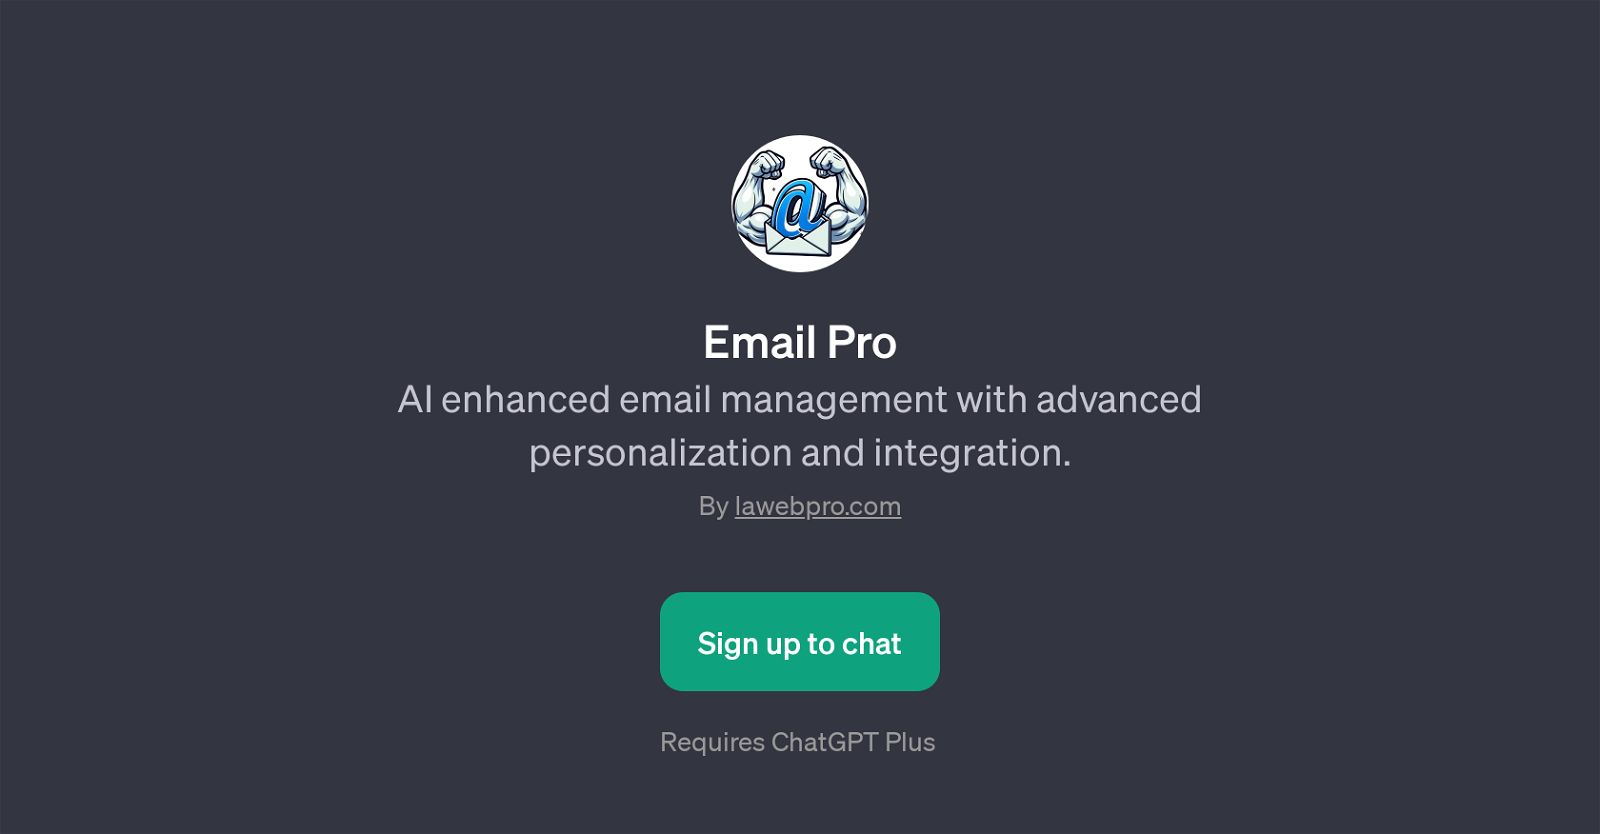 Email Pro website